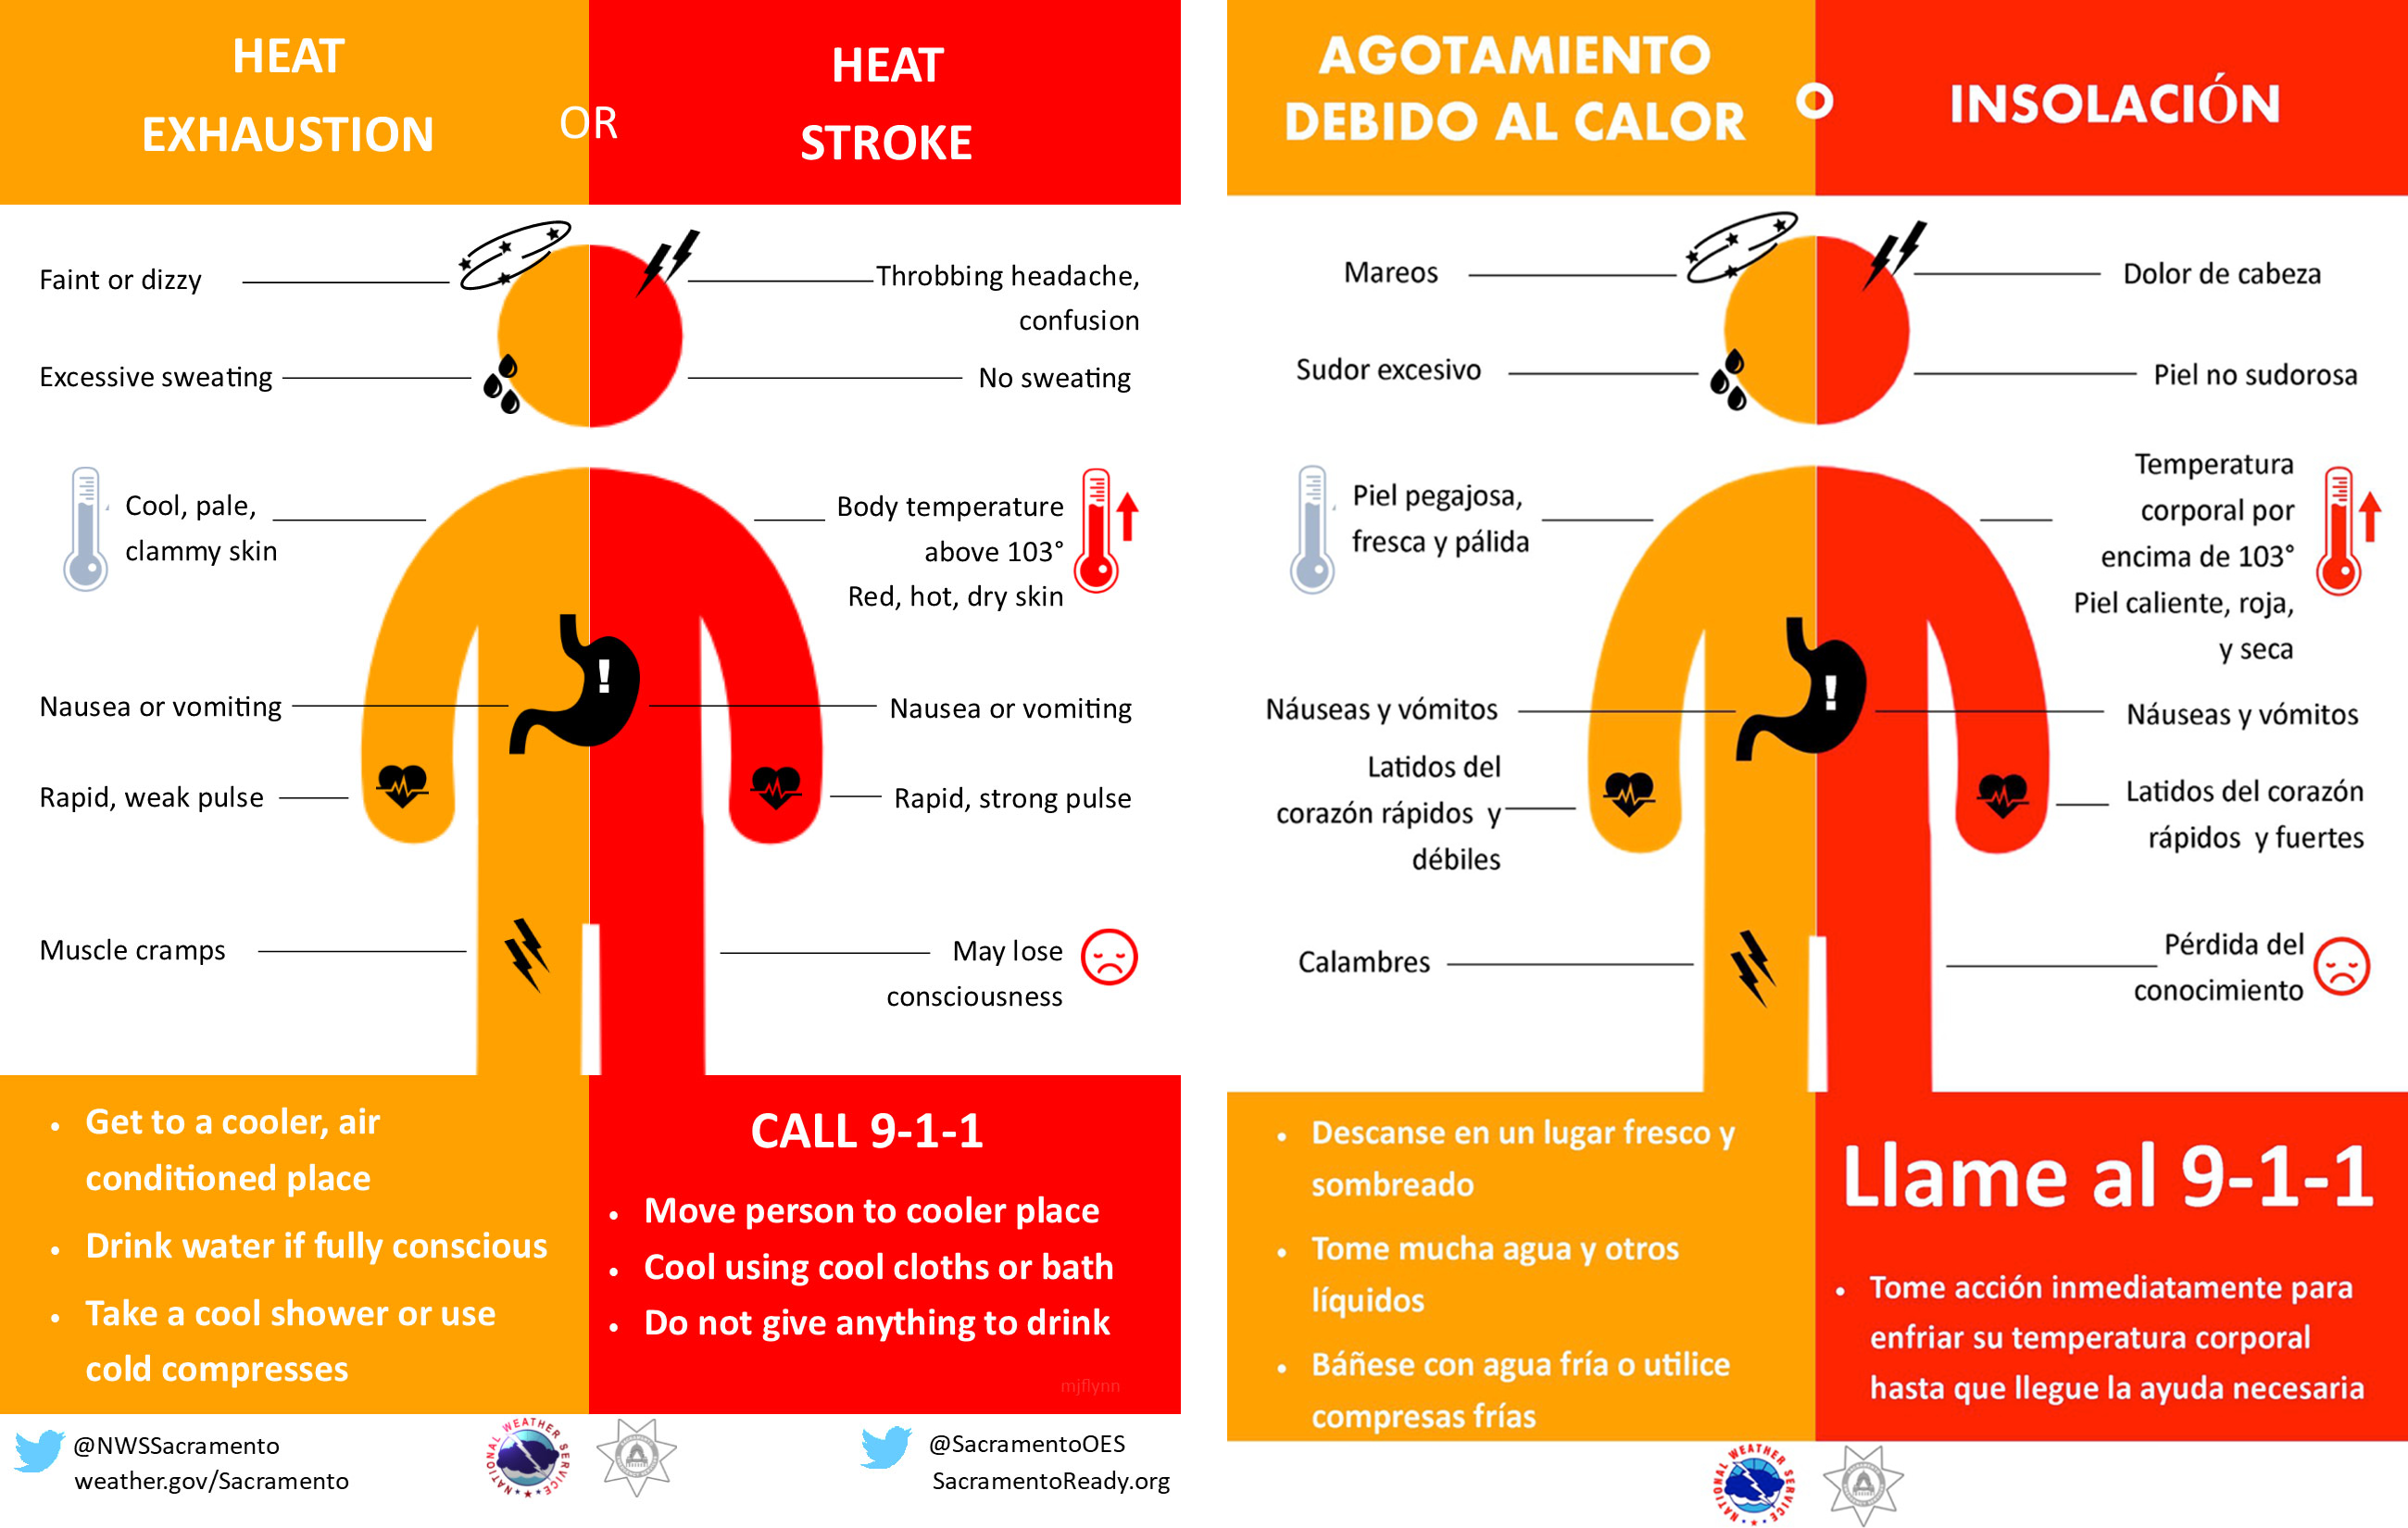 Graphic describing heat exhaustion and heat stroke in English and Spanish